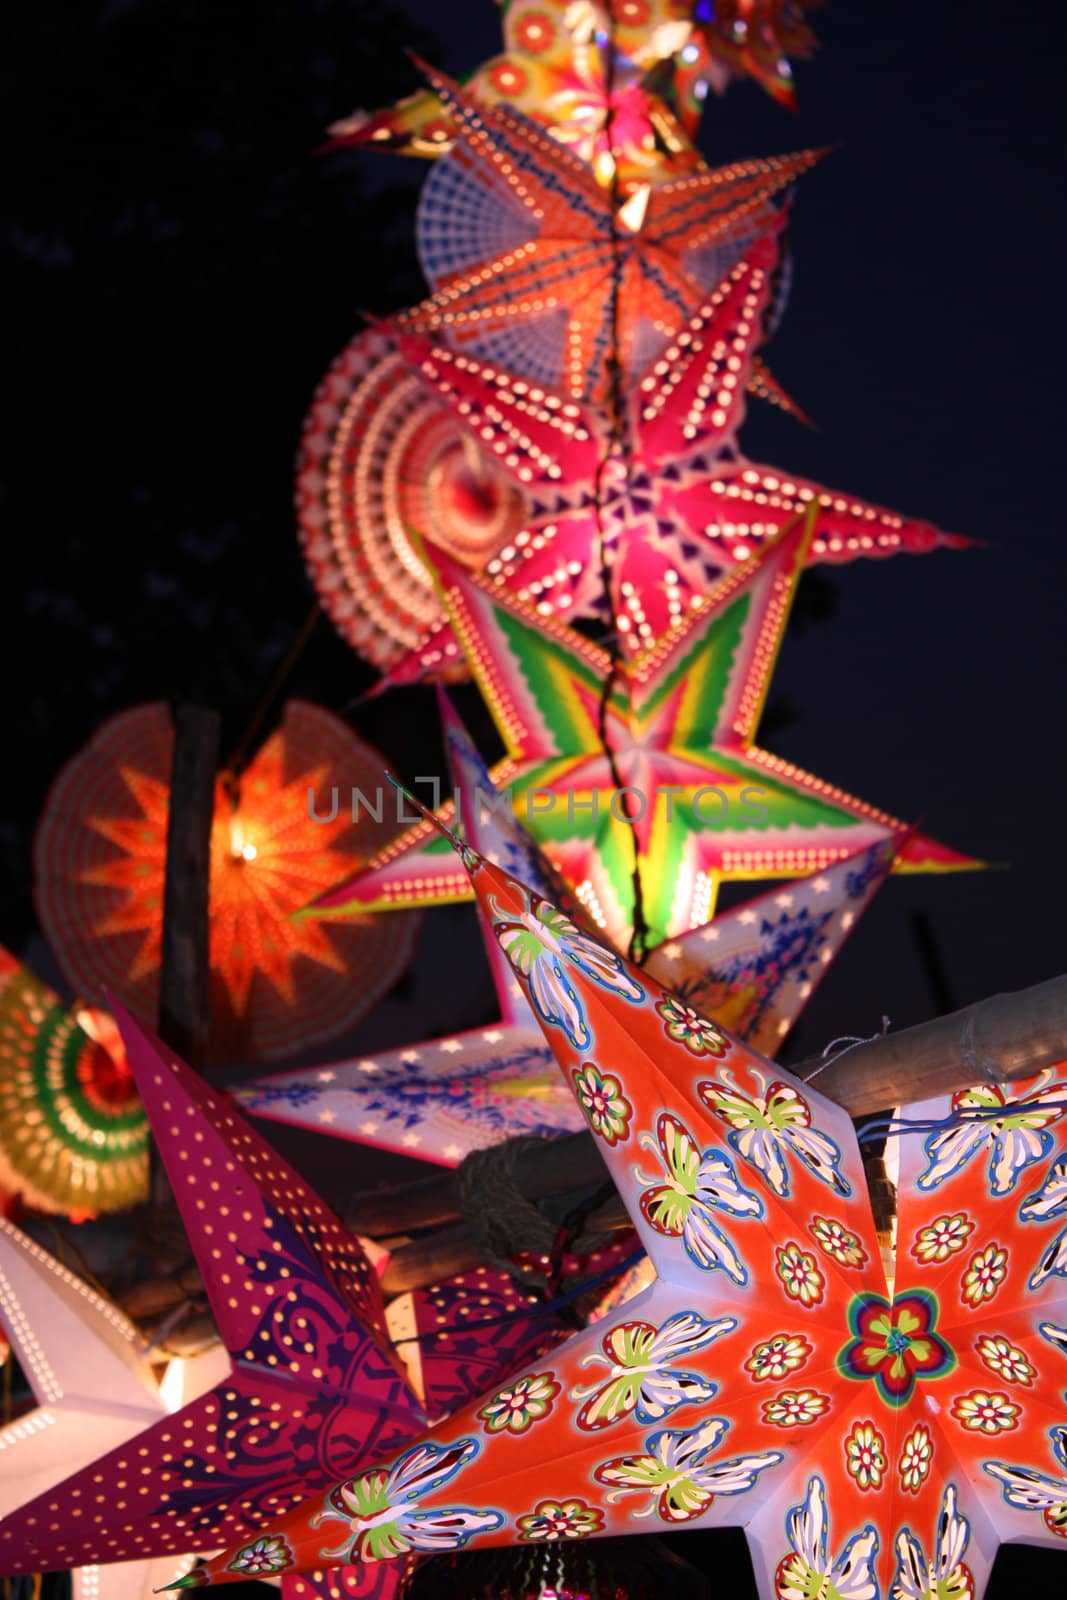 Beautiful colorful lanterns of various shapes lit on the occasion of Diwali / Christmas festival in India.